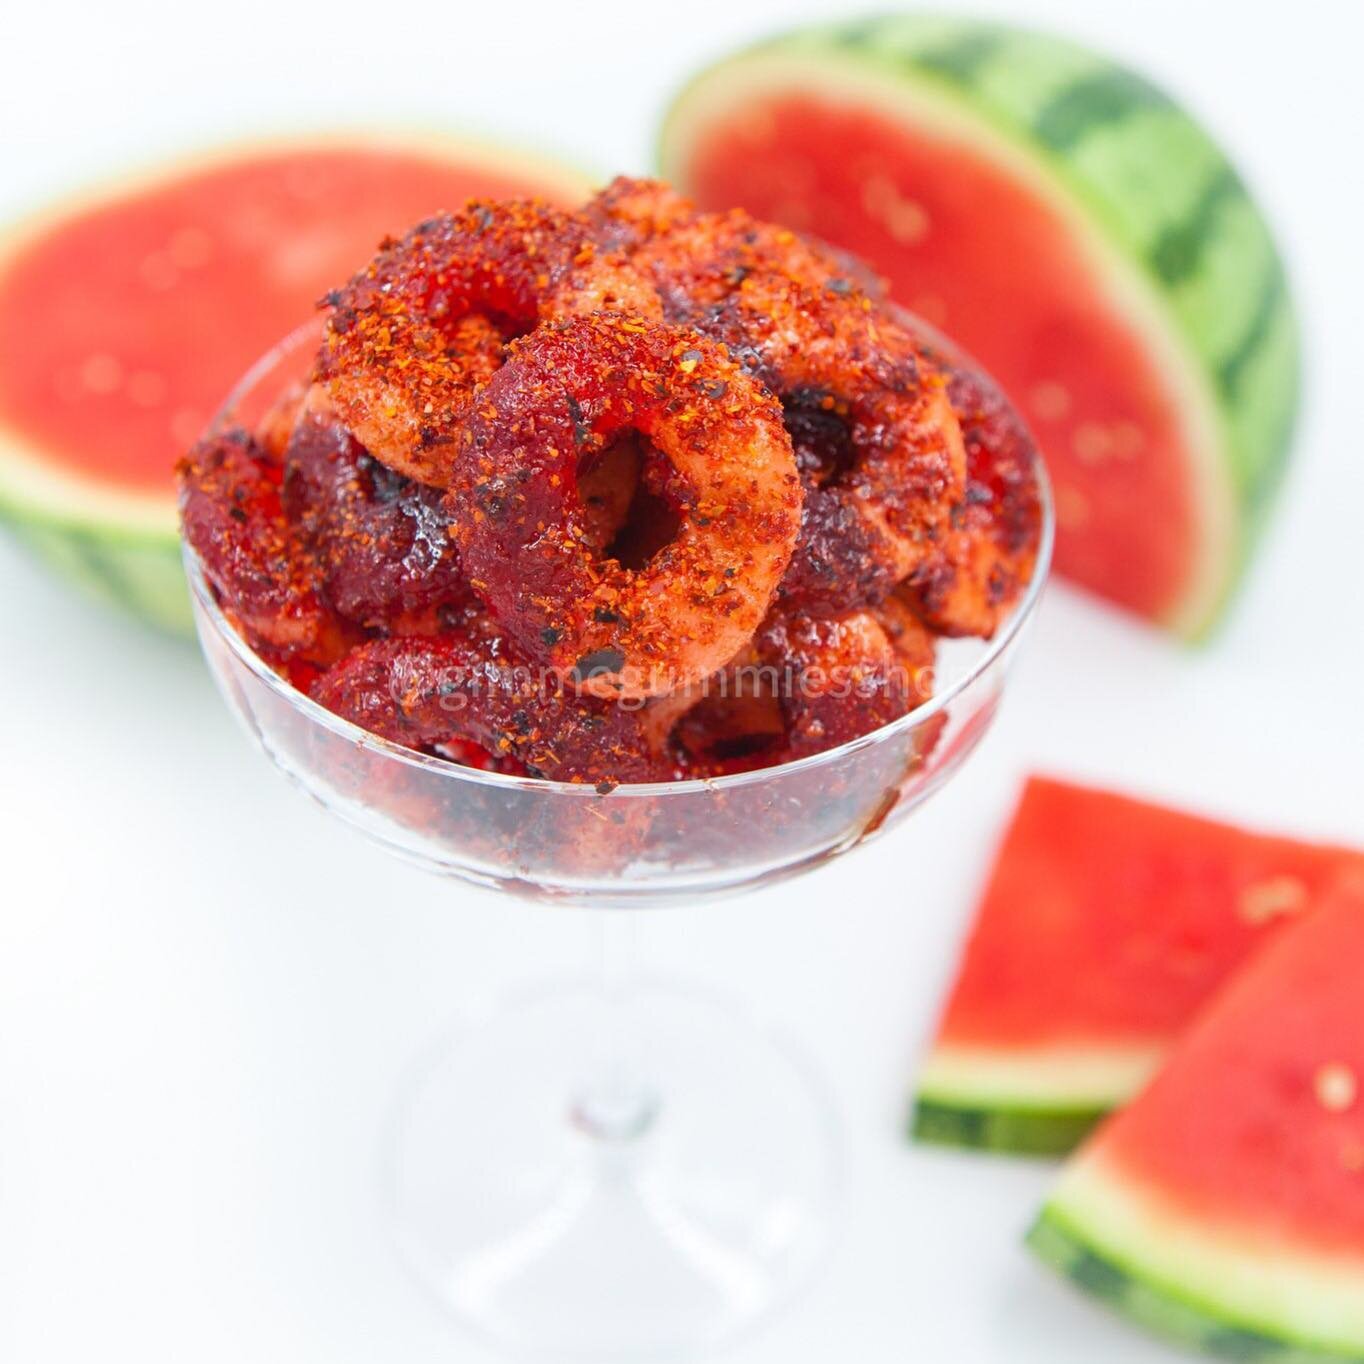 Let the summer vibes roll with our chili coated Watermelon Rings☀️Tossed in our premium sauce and special blend of spices. This one&rsquo;s a favorite among watermelon enthusiasts 🍉
⠀
&bull;&bull;&bull; Also available &bull;&bull;&bull;⠀
⠀
🍍 Pineap